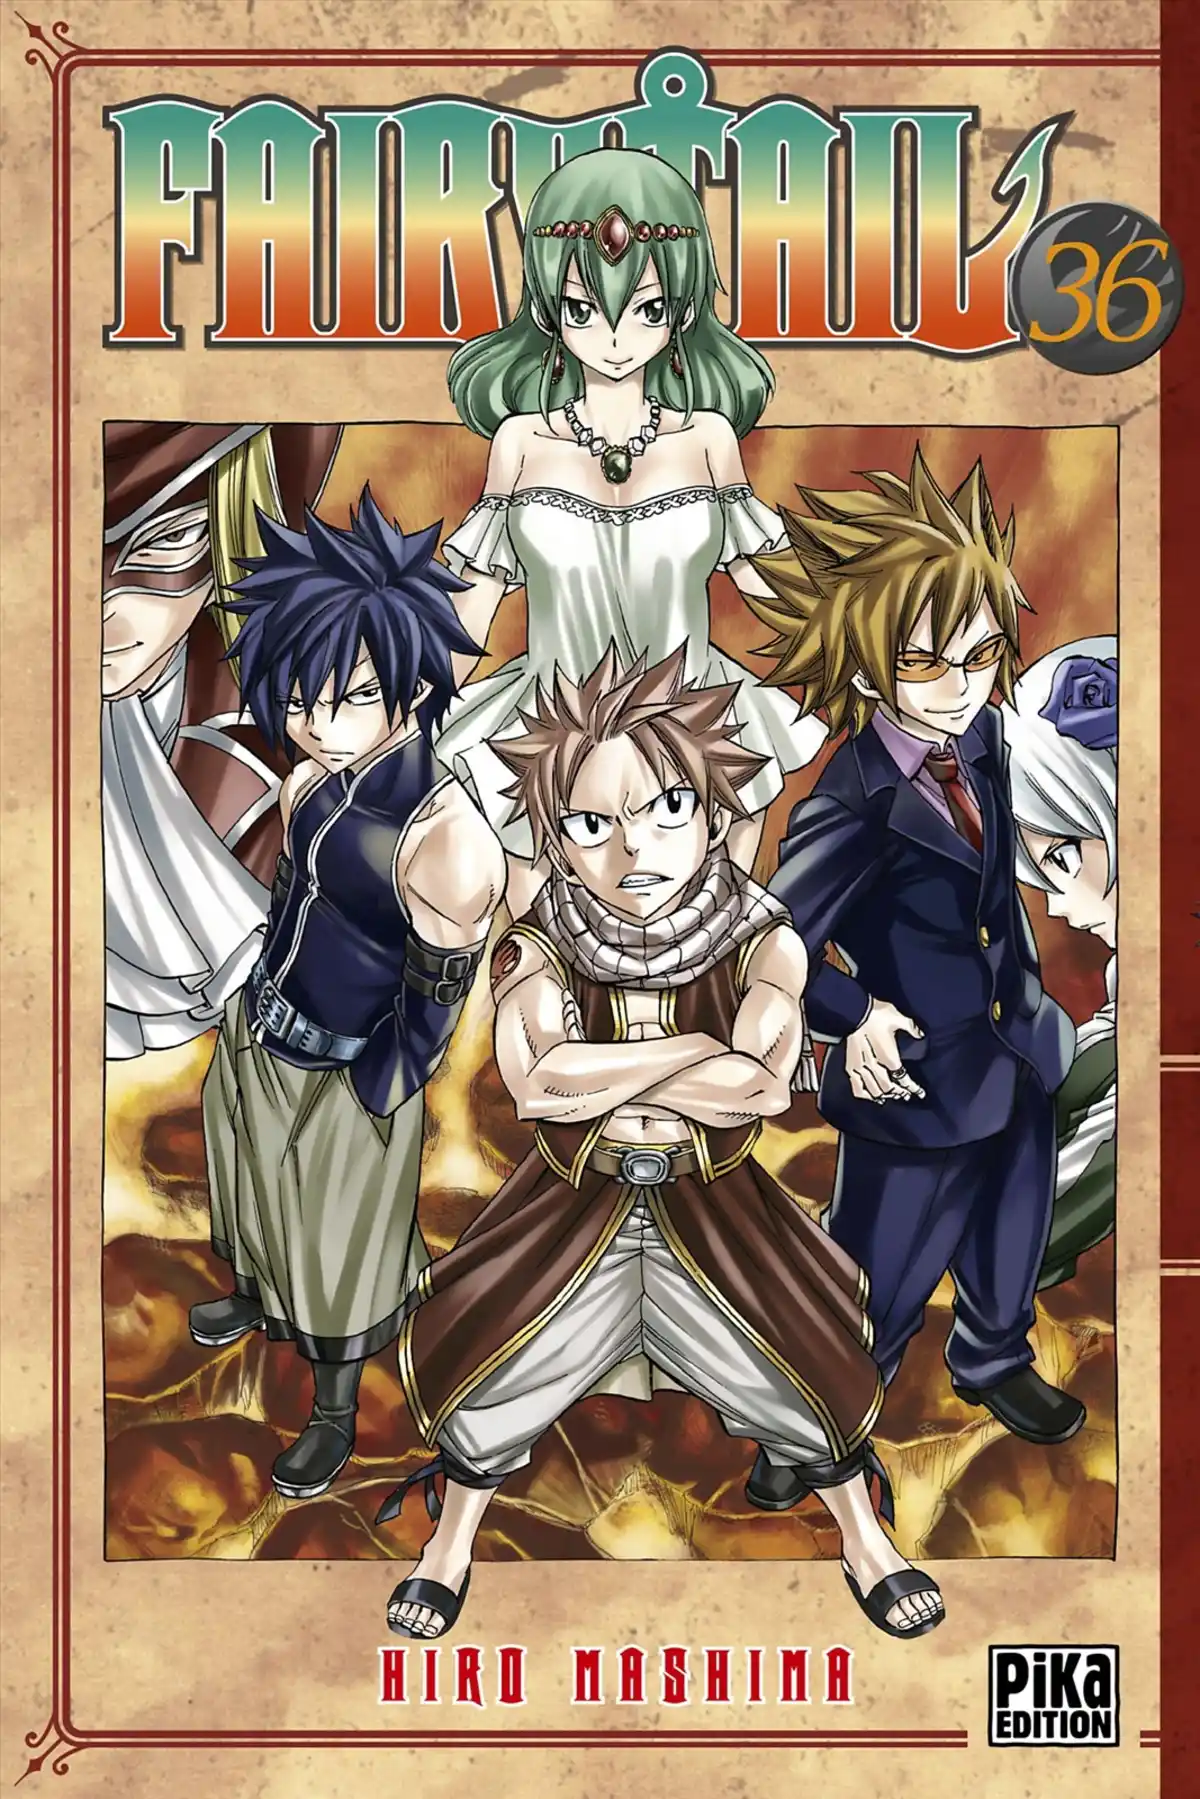 Fairy Tail Volume 36 page 1